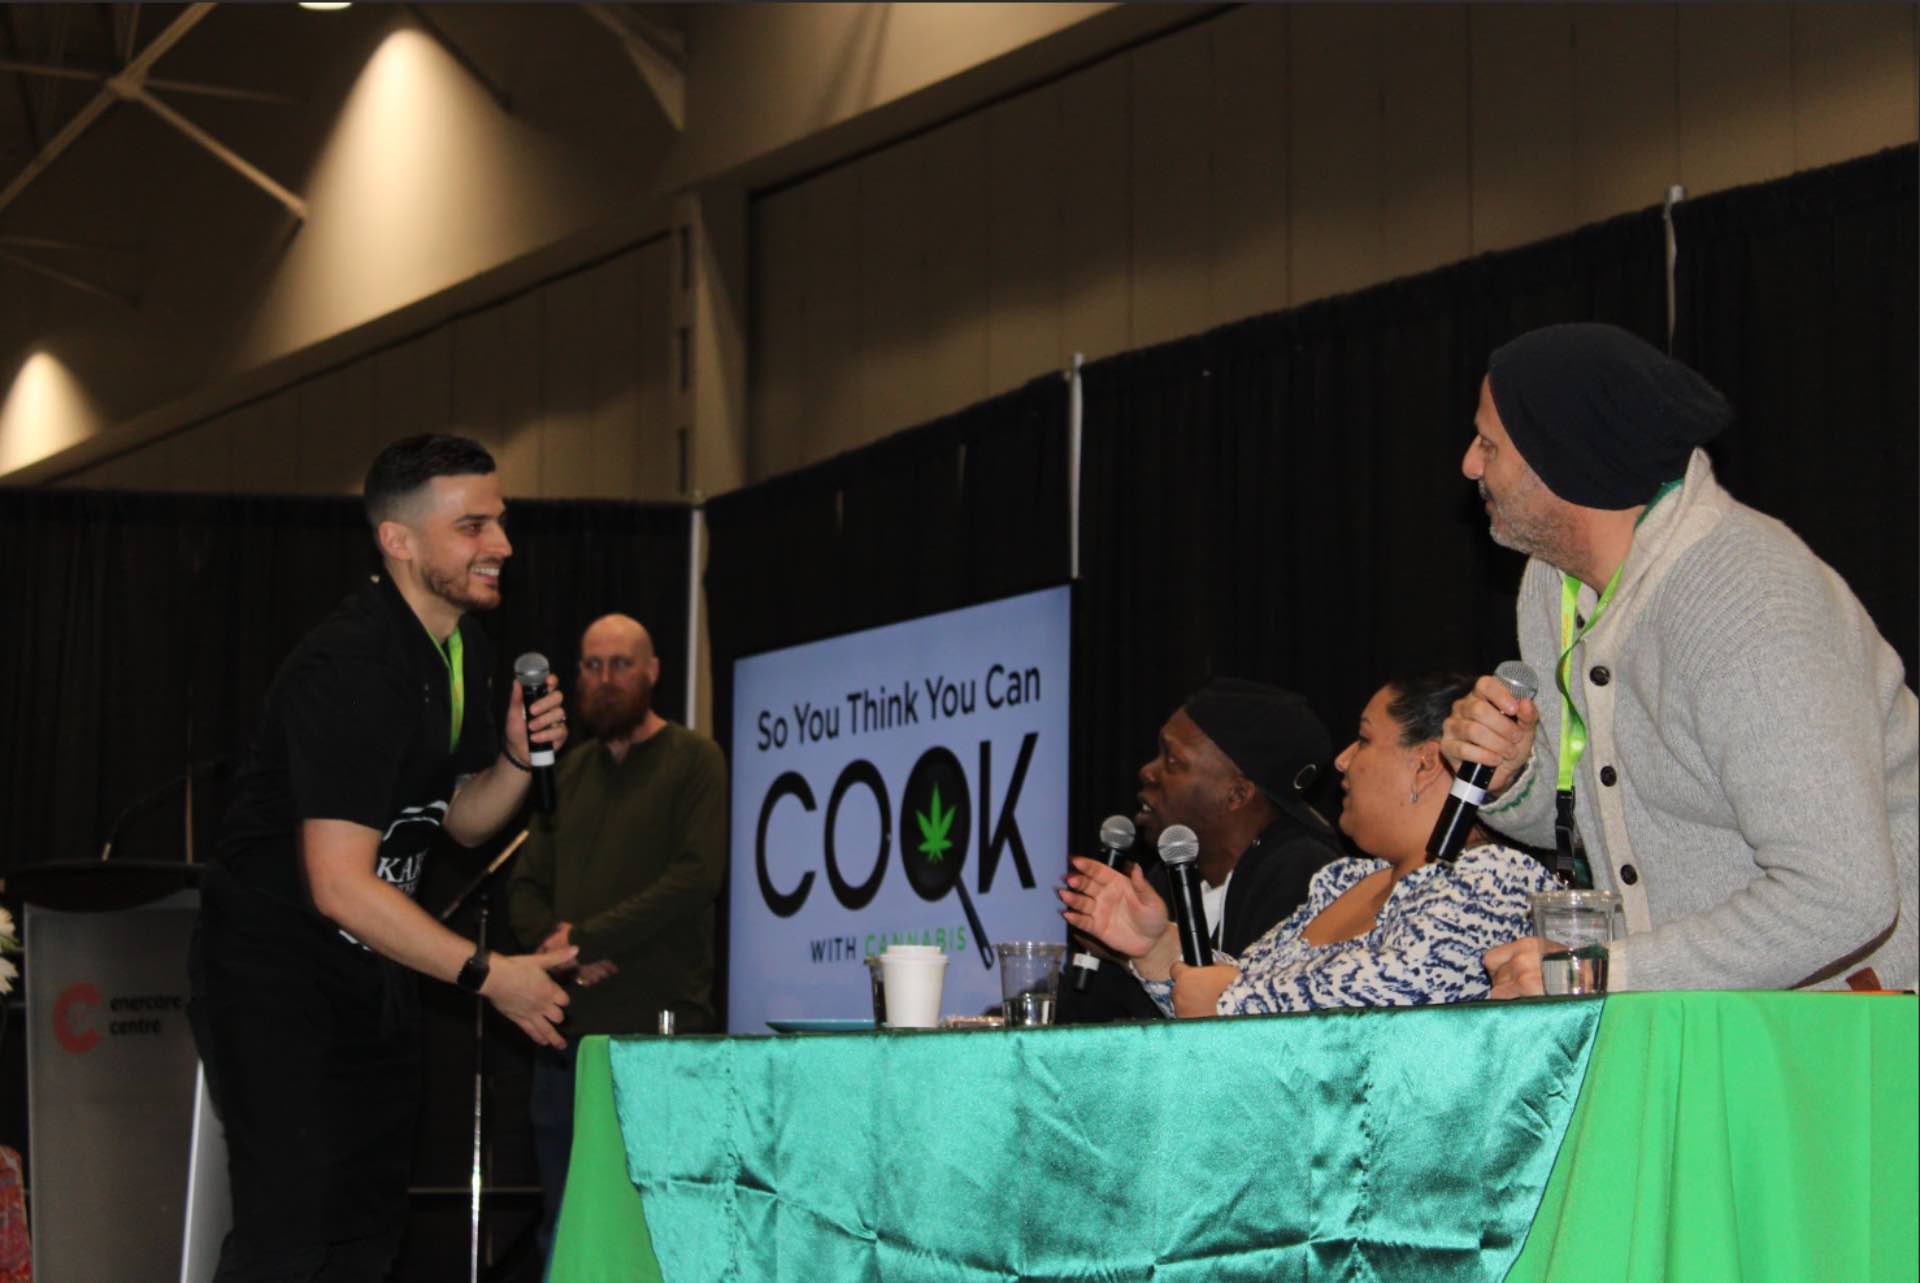 So You Think You Can Cook With Cannabis at Cannexpo